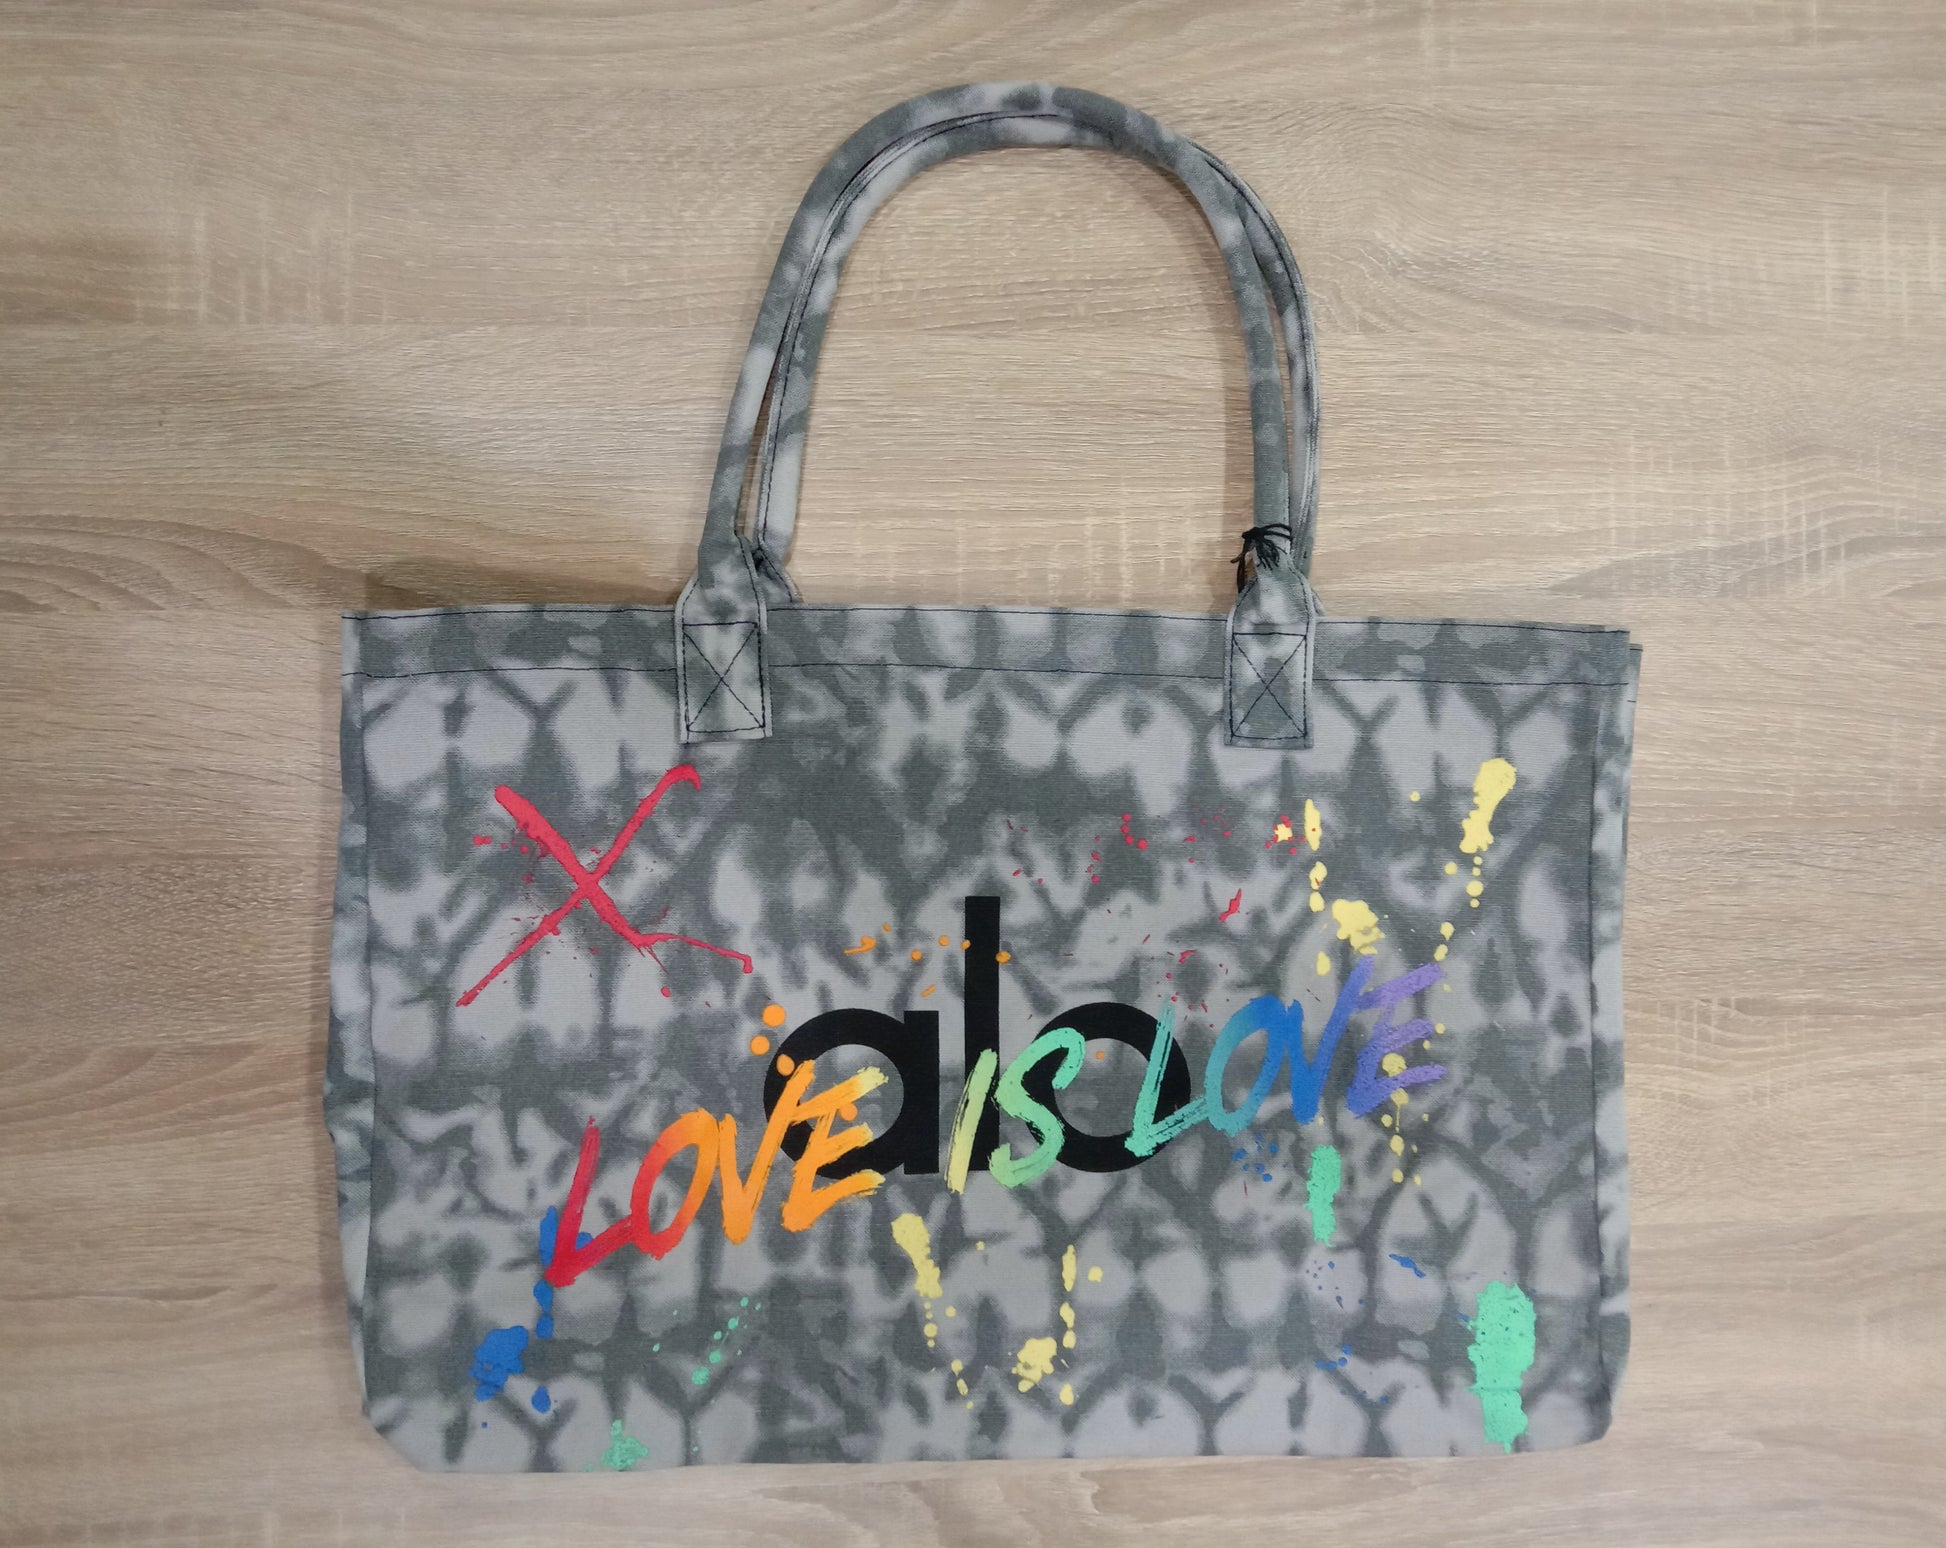 Alo Yoga Gray Tie-Dye Shopper Tote Bag - New with Tags